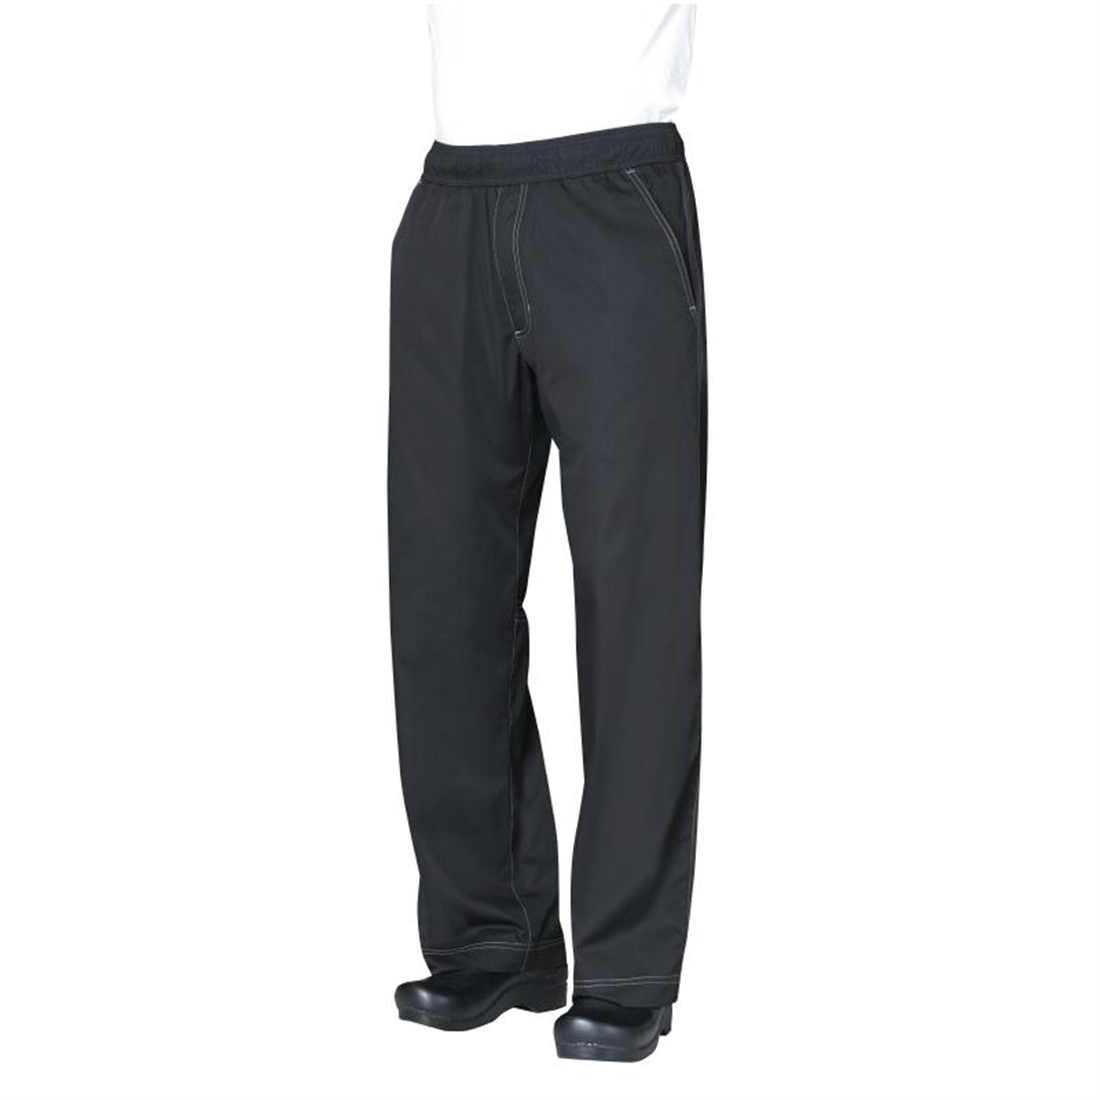 Chef Pants Baggy Work Pant Chefs Trousers Black 